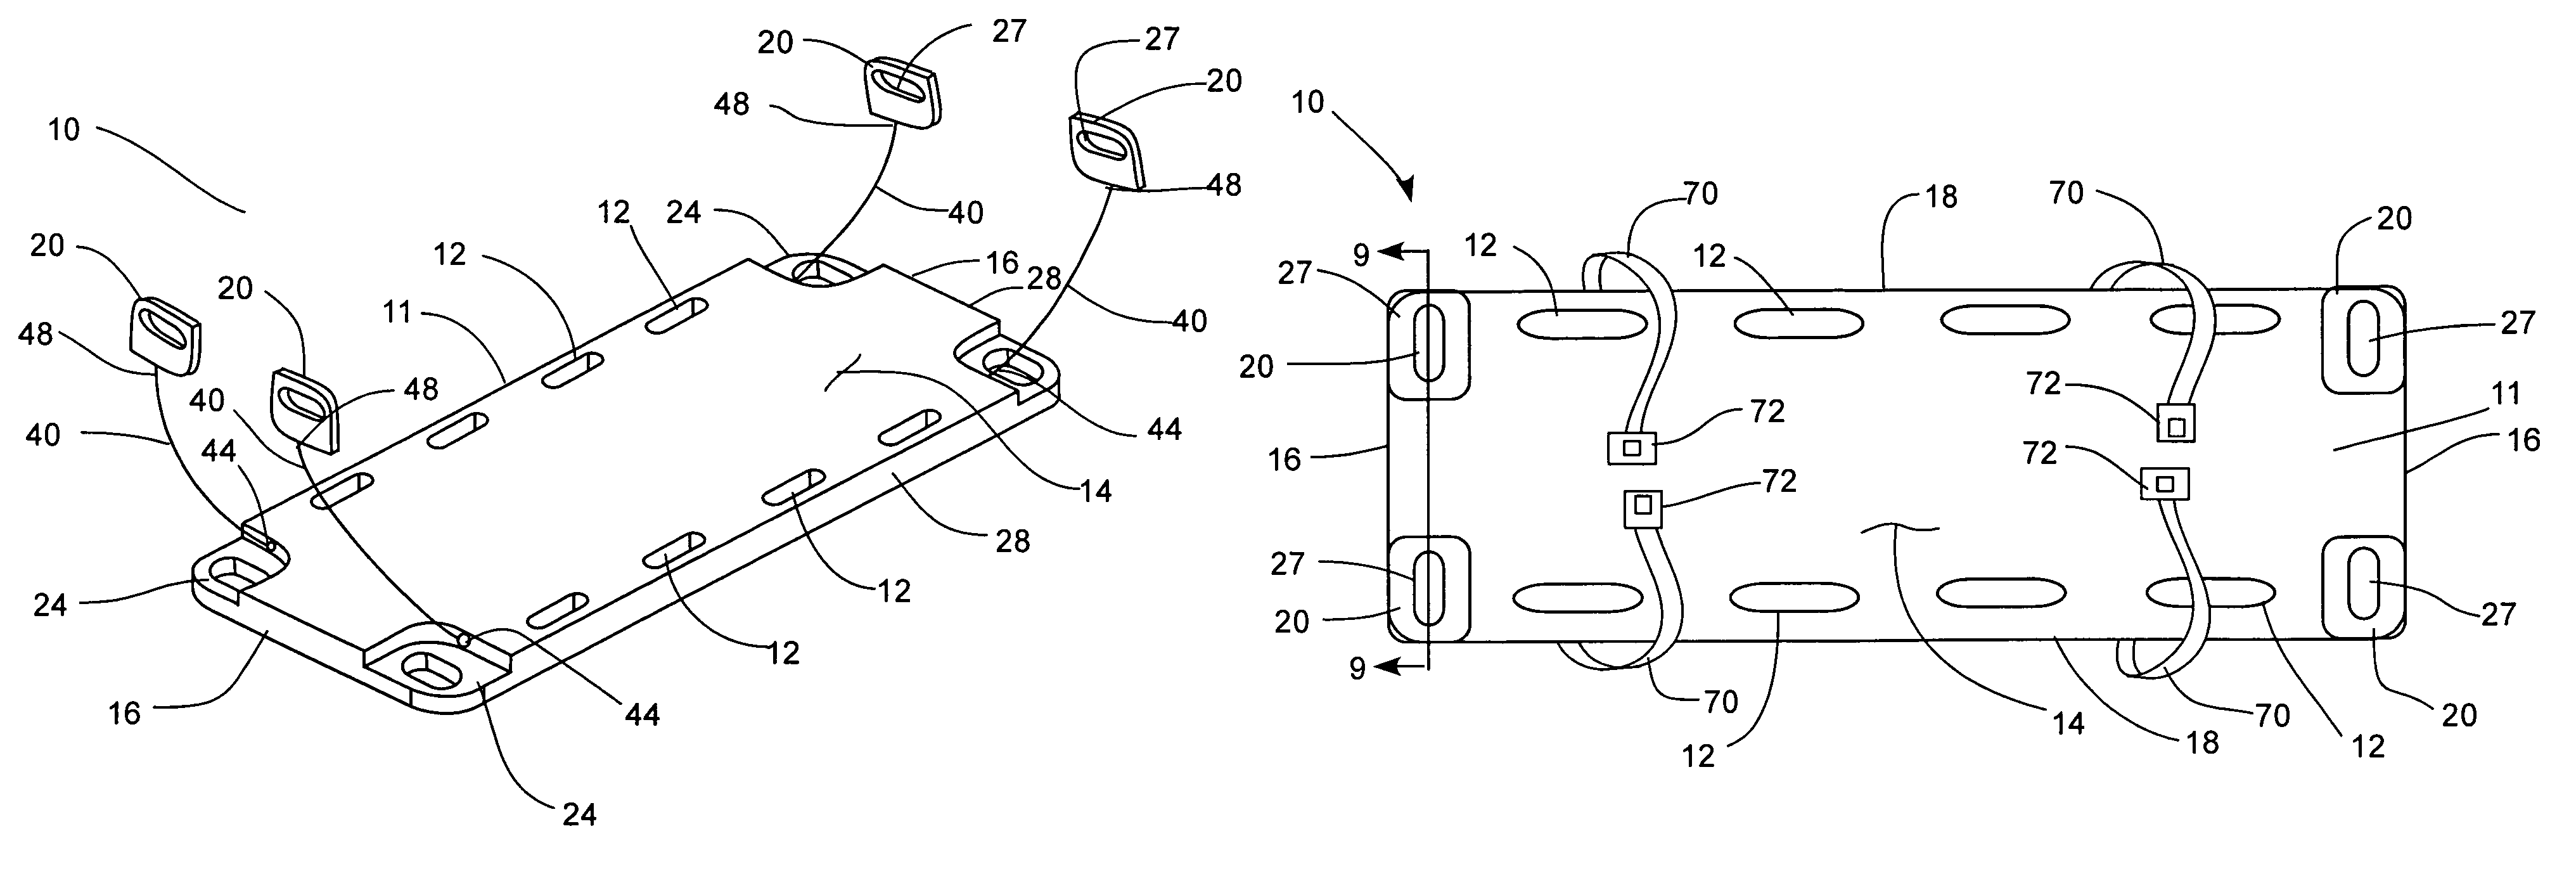 Patient transportation device with retractable, extendible handles to facilitate lifting of a patient